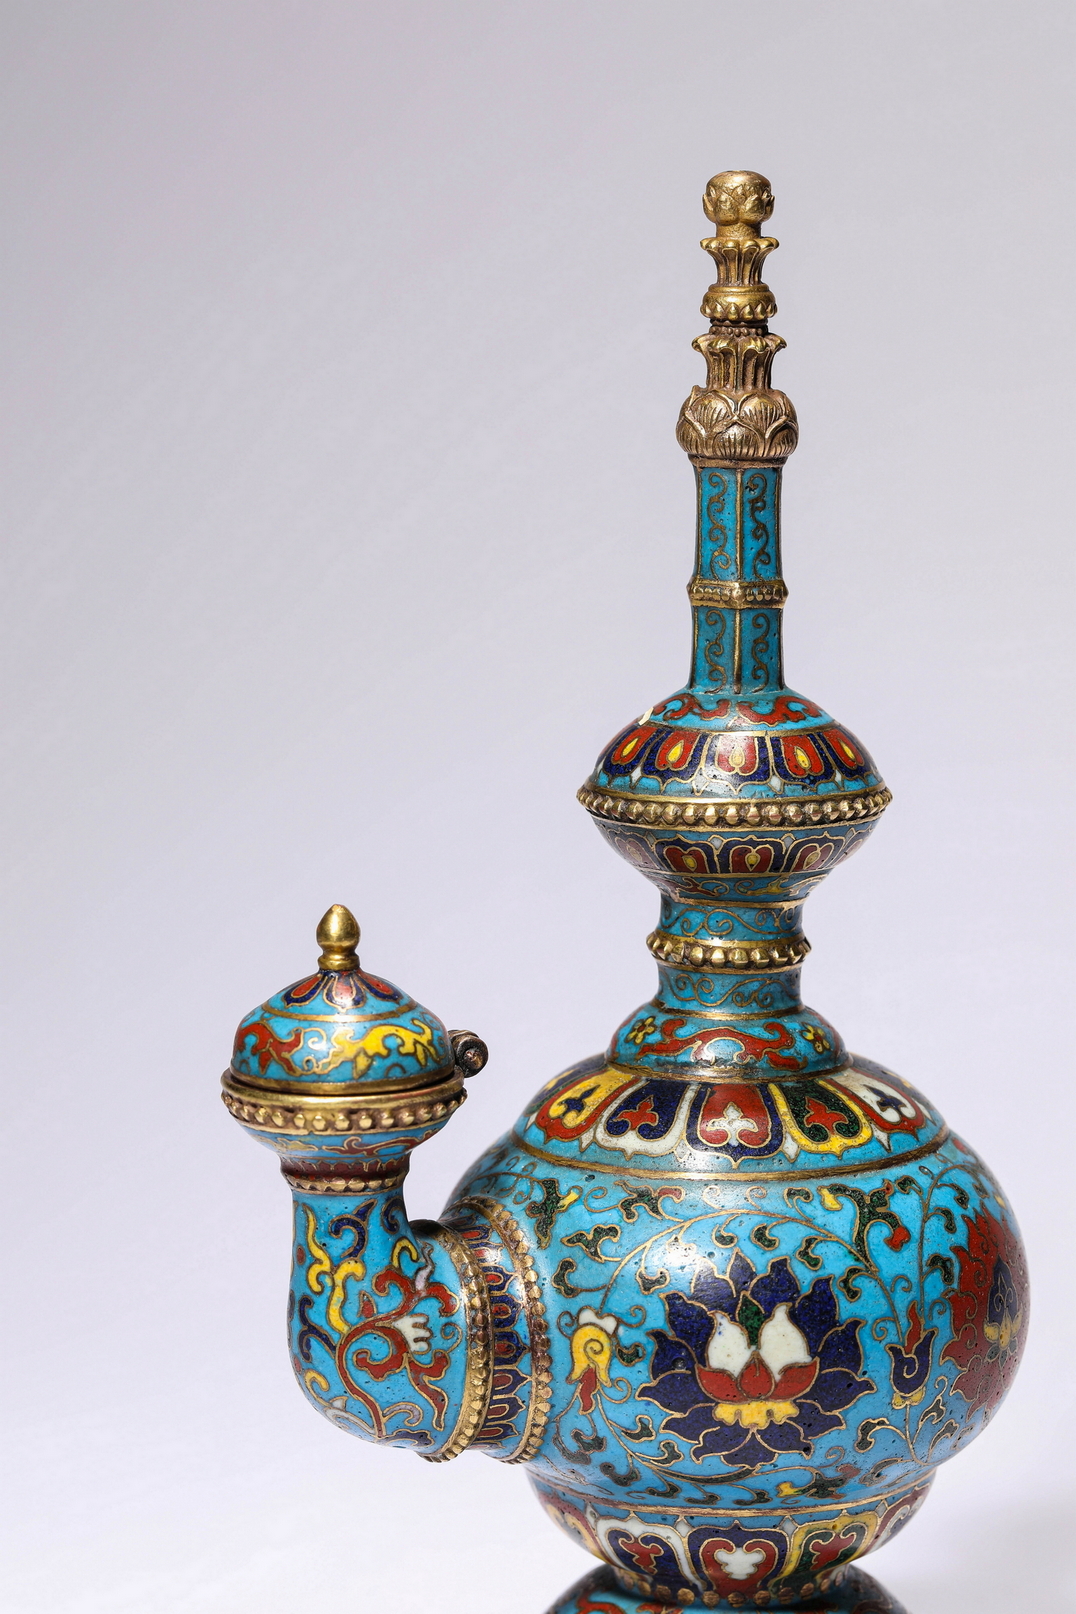 FINE CHINESE CLOISONNE, 17TH/18TH Century Pr.  Collection of NARA private gallary.  - Image 2 of 6